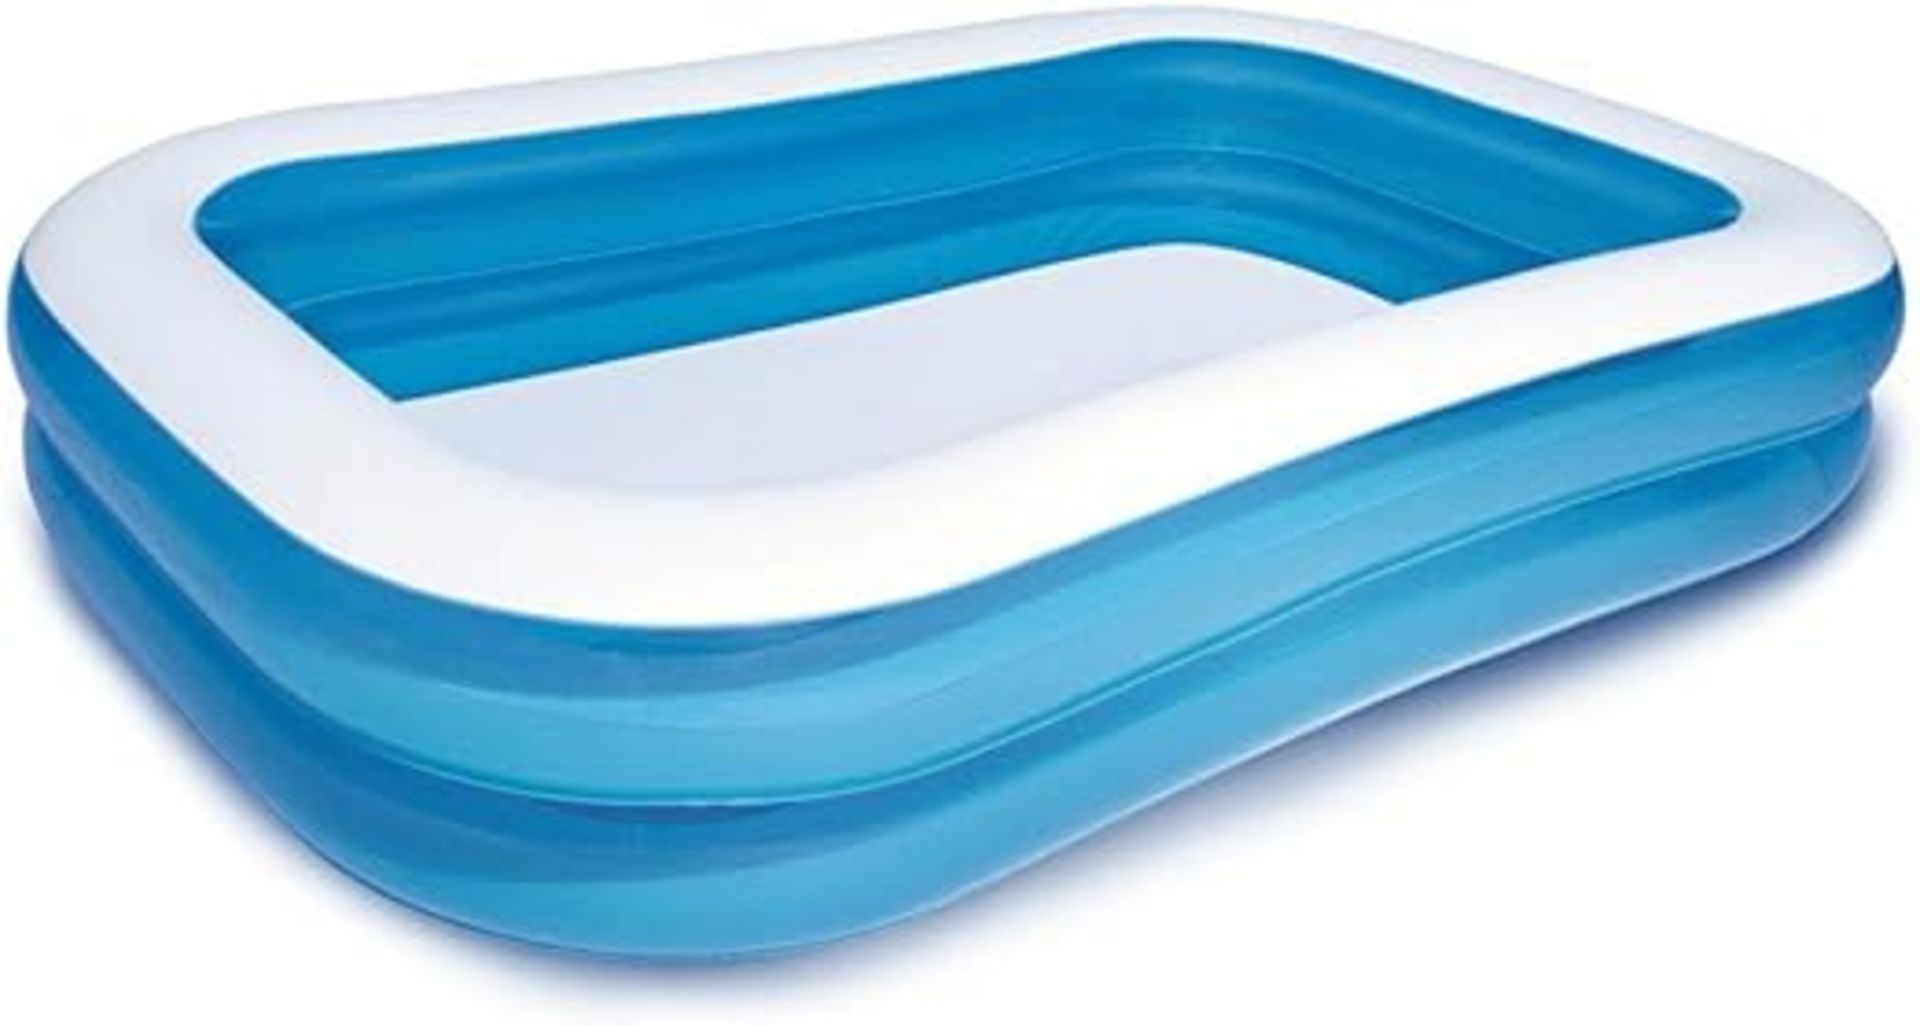 2 x Bestway Family Pool, rectangular pool for children, easy to assemble, blue, 262 x 175 x 51 cm-